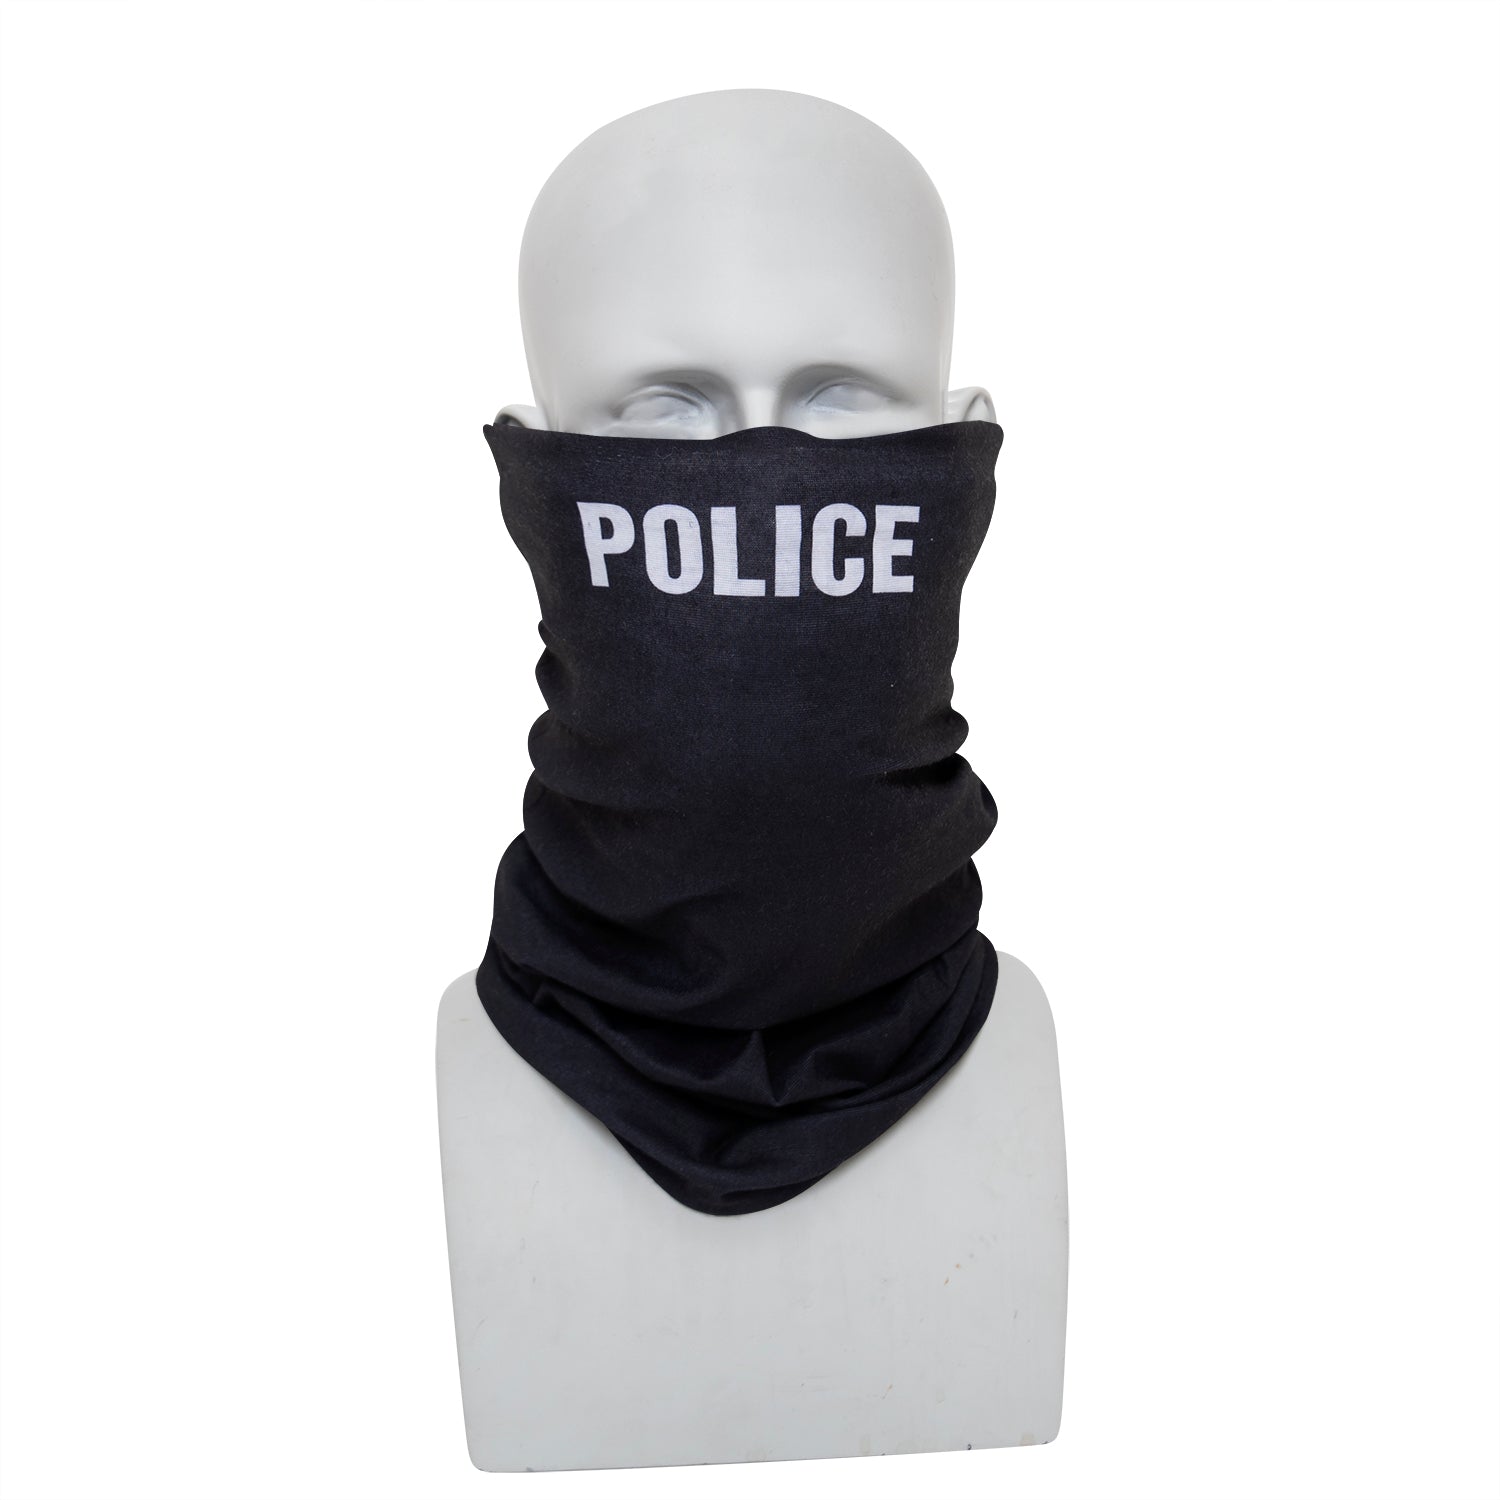 Rothco’s adaptable Multi-Use Tactical Wrap featuring a Police print has over a dozen applications and can be worn as a neck gaiter, bandana face covering, balaclava, headwrap, and more while on the job. www.defenceqstore.com.au